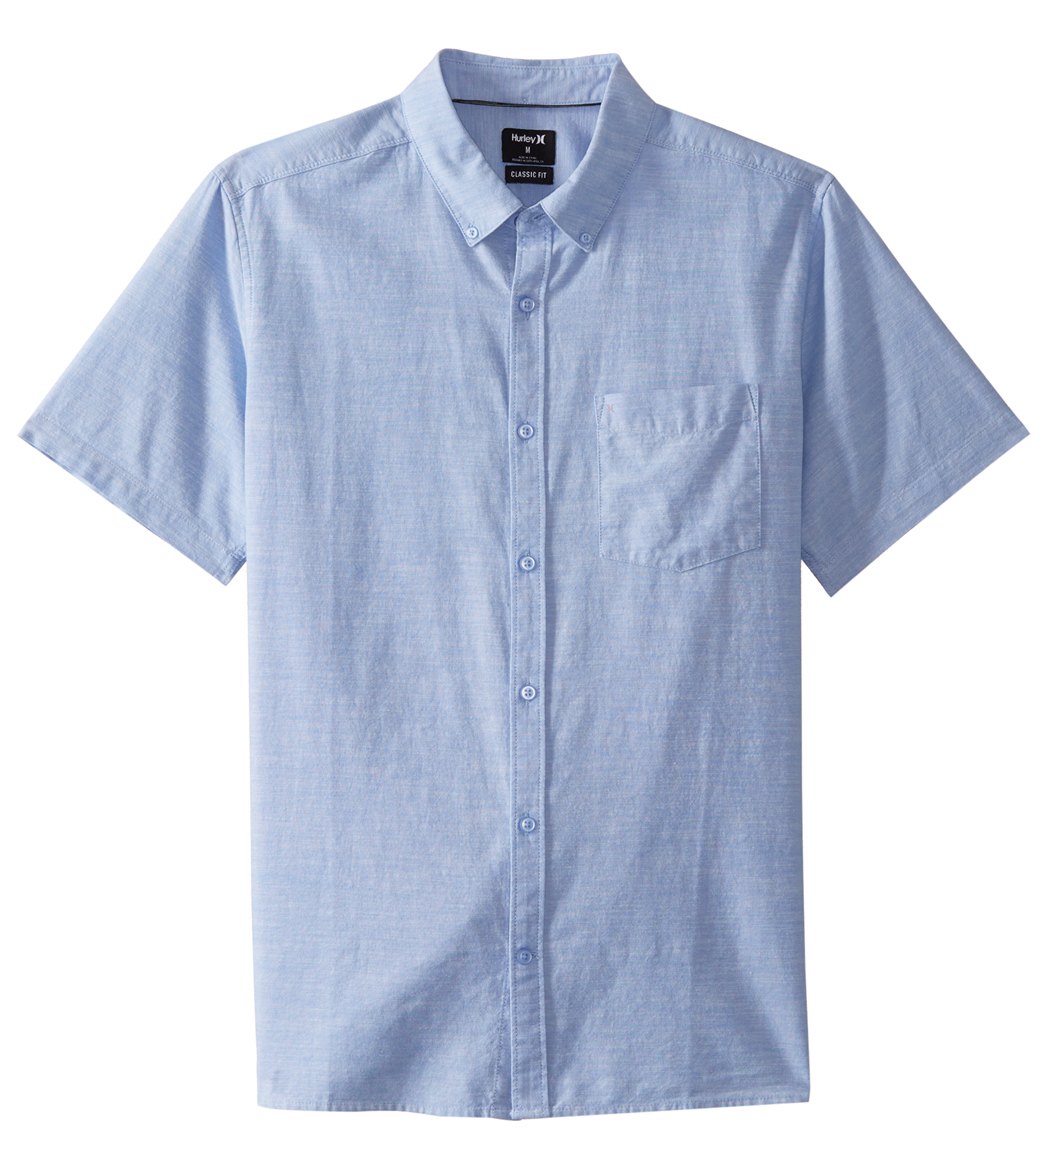 Hurley Men's One & Only 2.0 Short Sleeve Woven Shirt - Blue Oxford Small Cotton - Swimoutlet.com